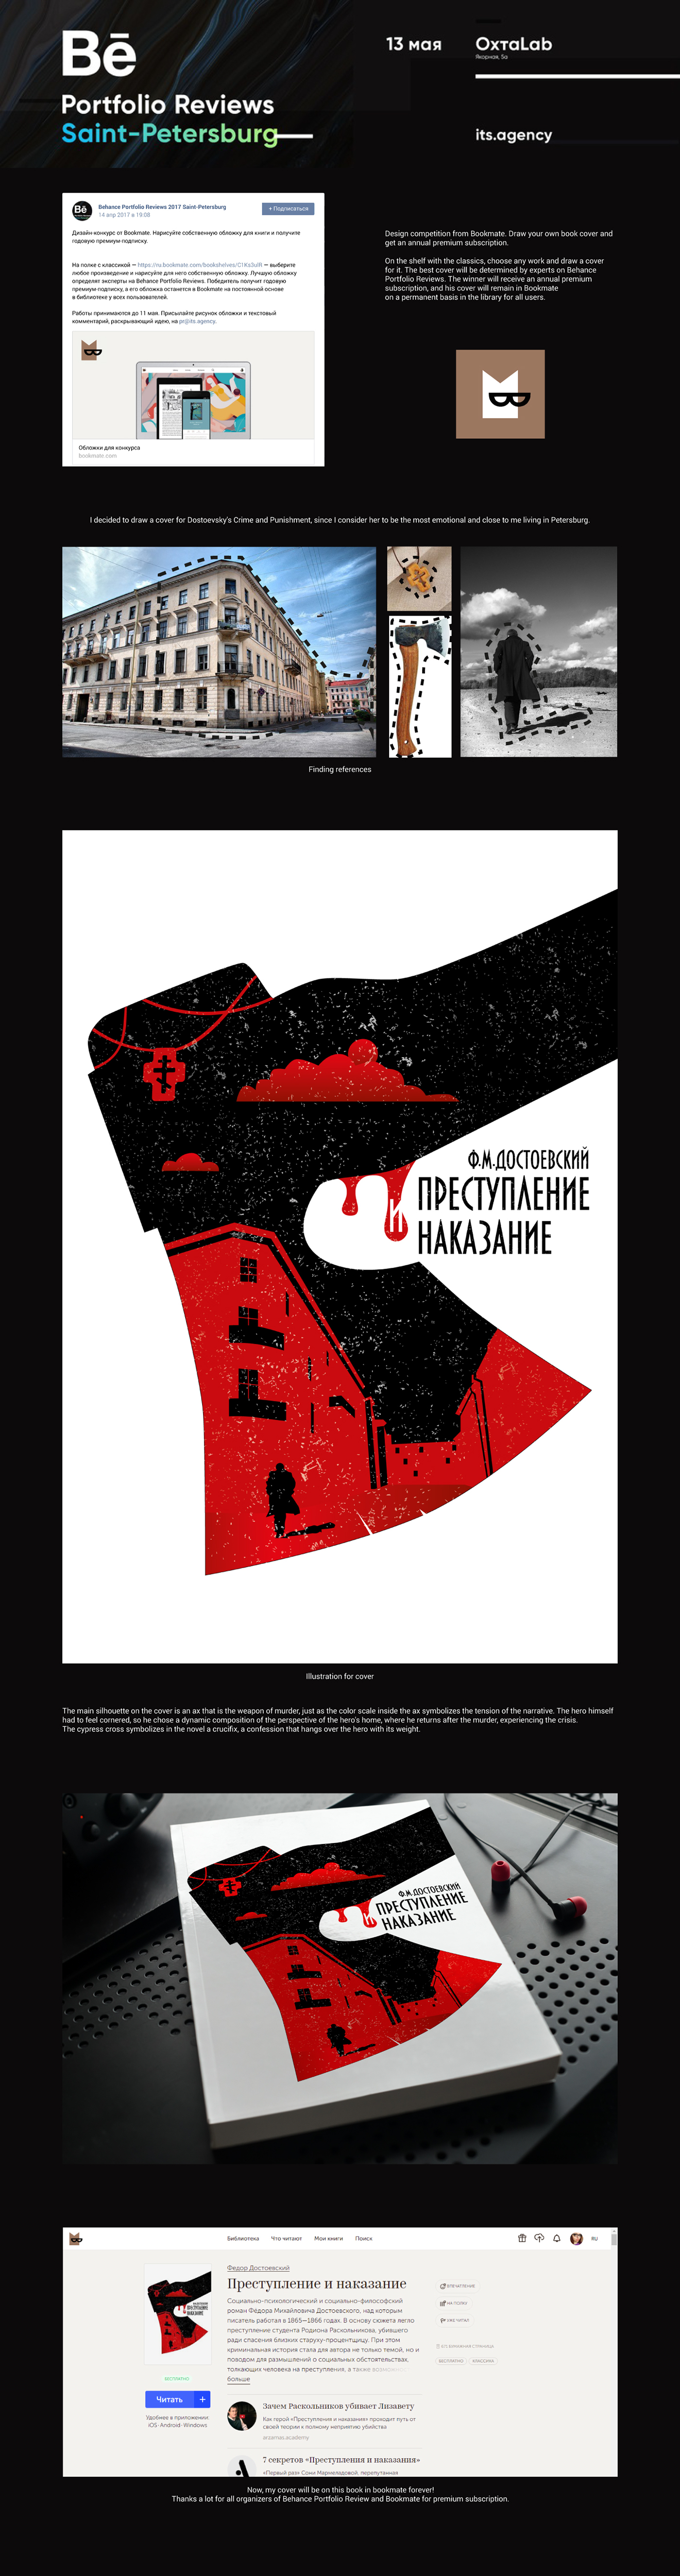 book cover cover Bookmate cover design literature Dostoevsky red black library book